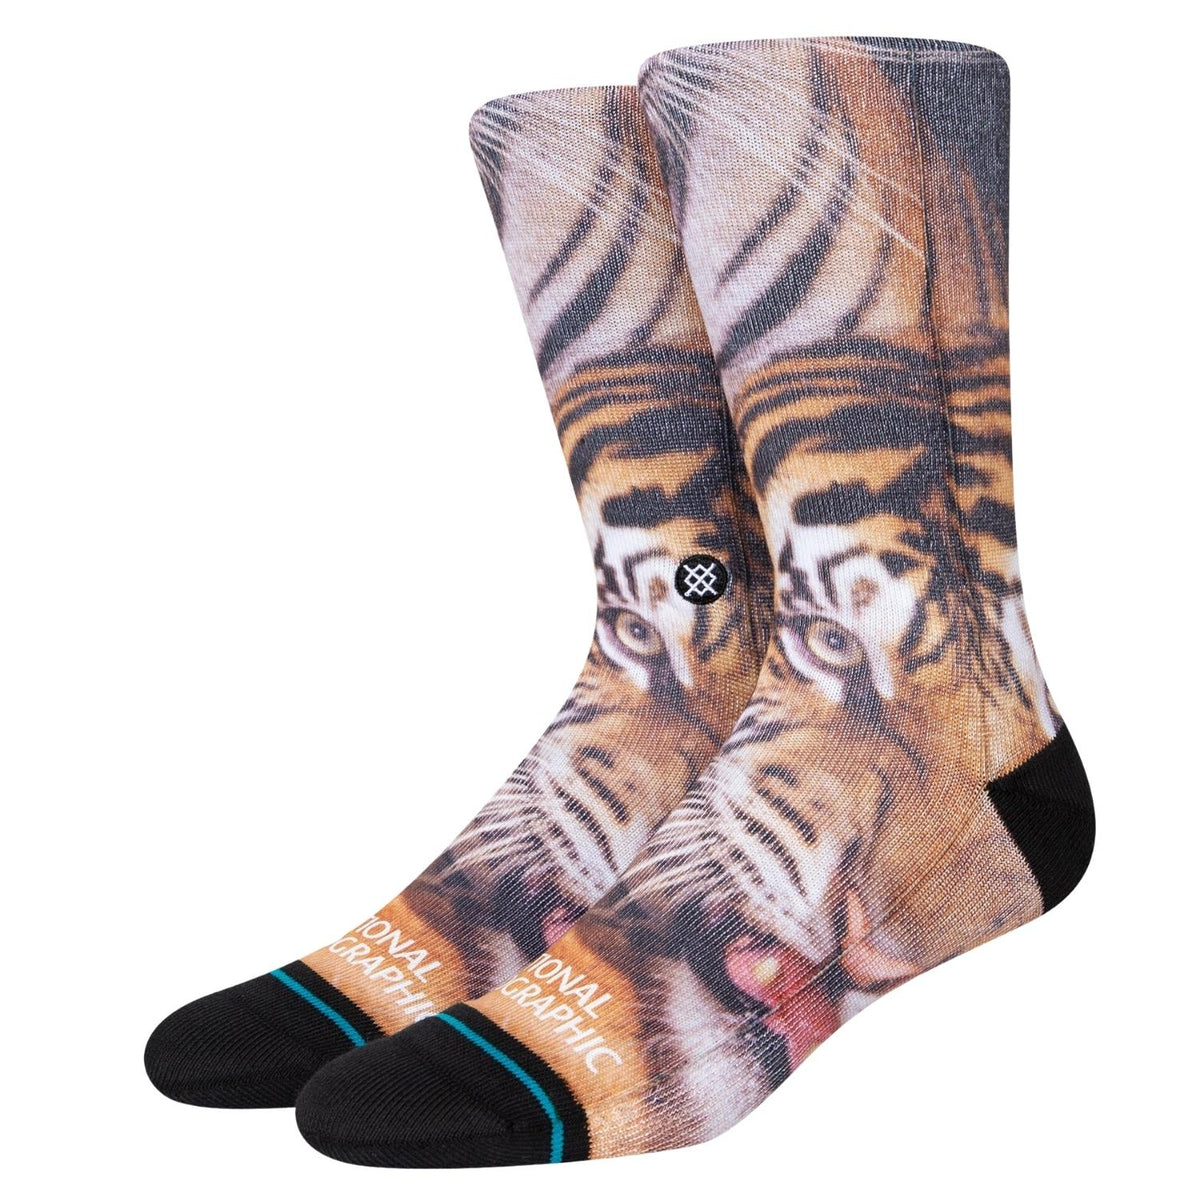 Stance X National Geographic Two Tigers Socks - Black - Mens Crew Length Socks by Stance L (UK8-12.5)